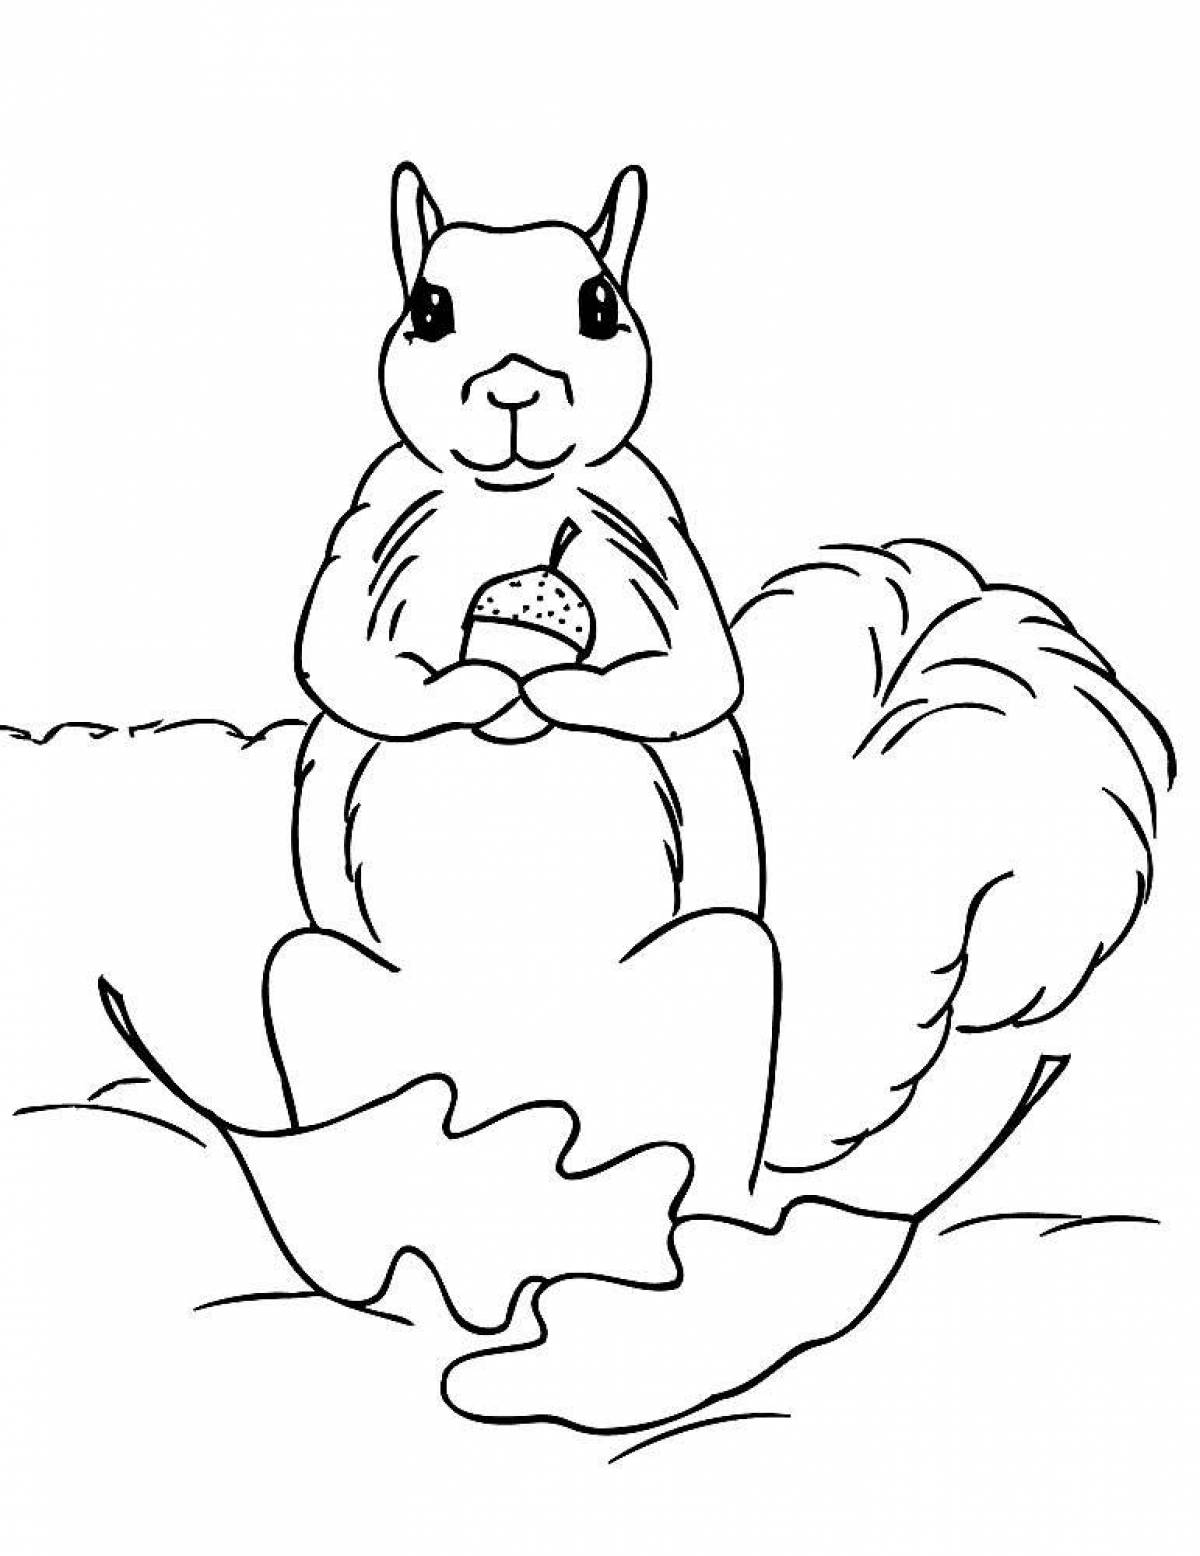 Fun squirrel coloring for kids